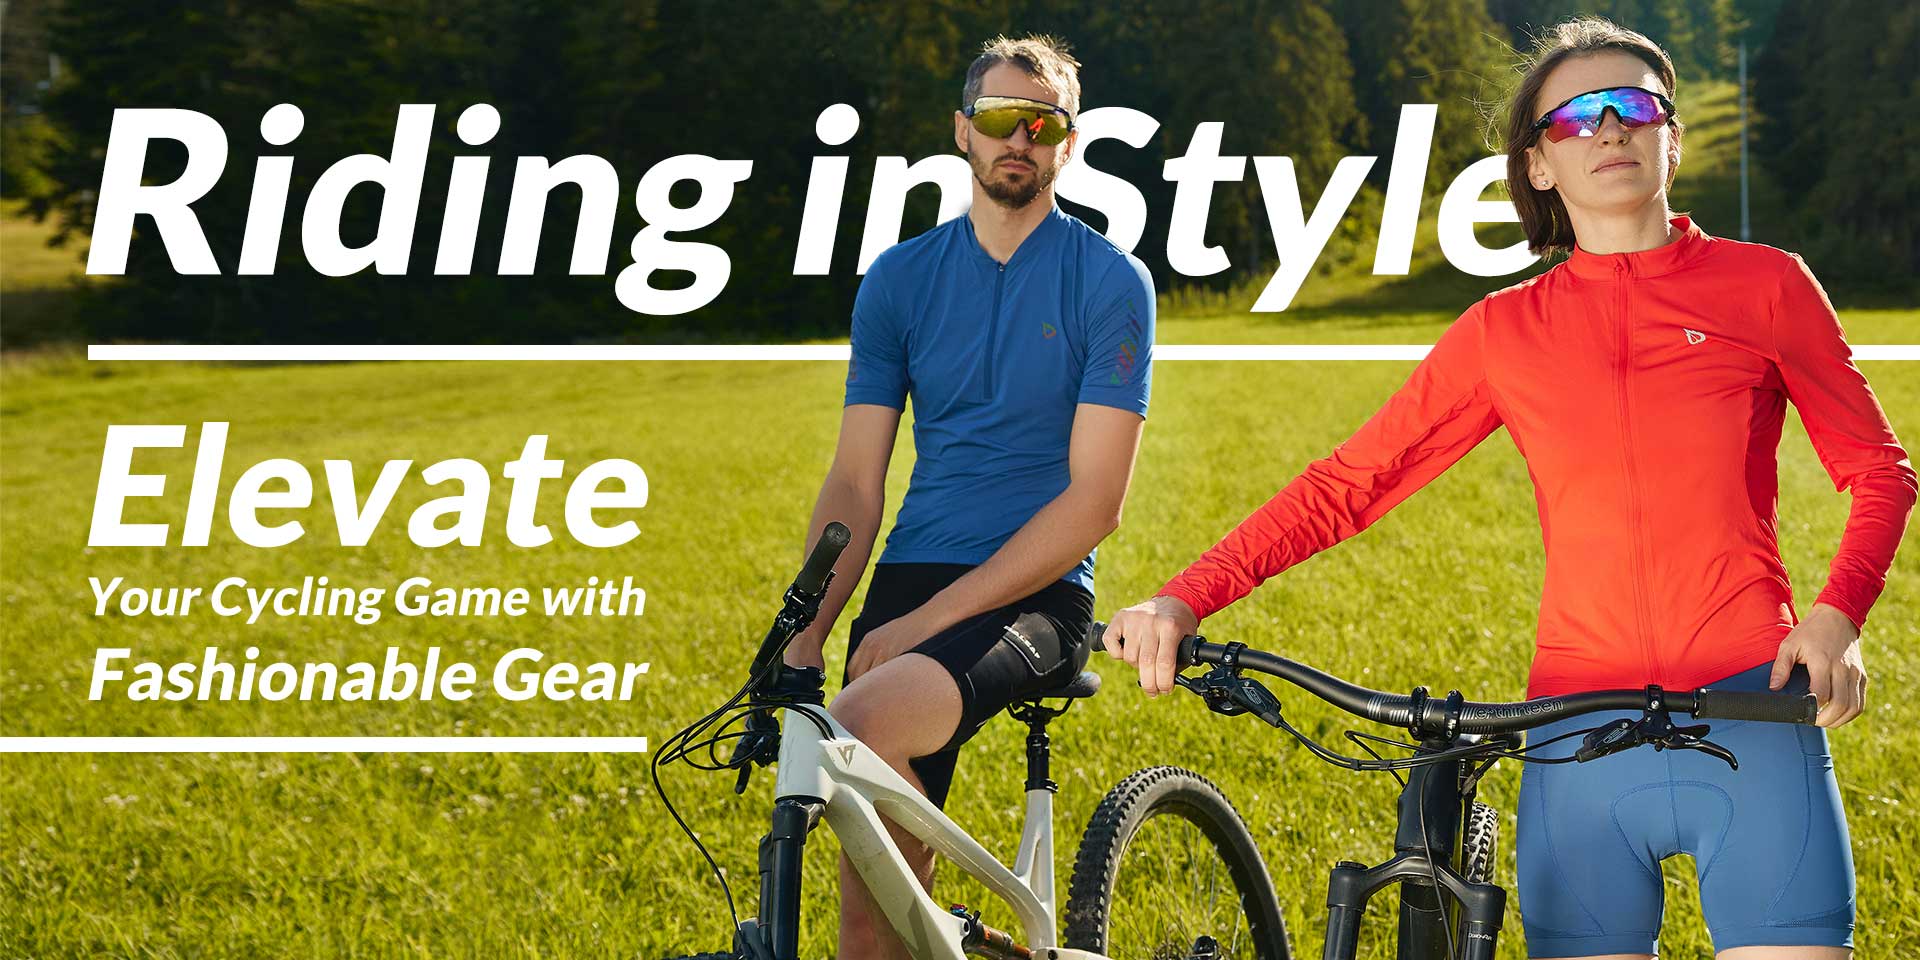 Riding in Style: Elevate Your Cycling Game with Fashionable Gear